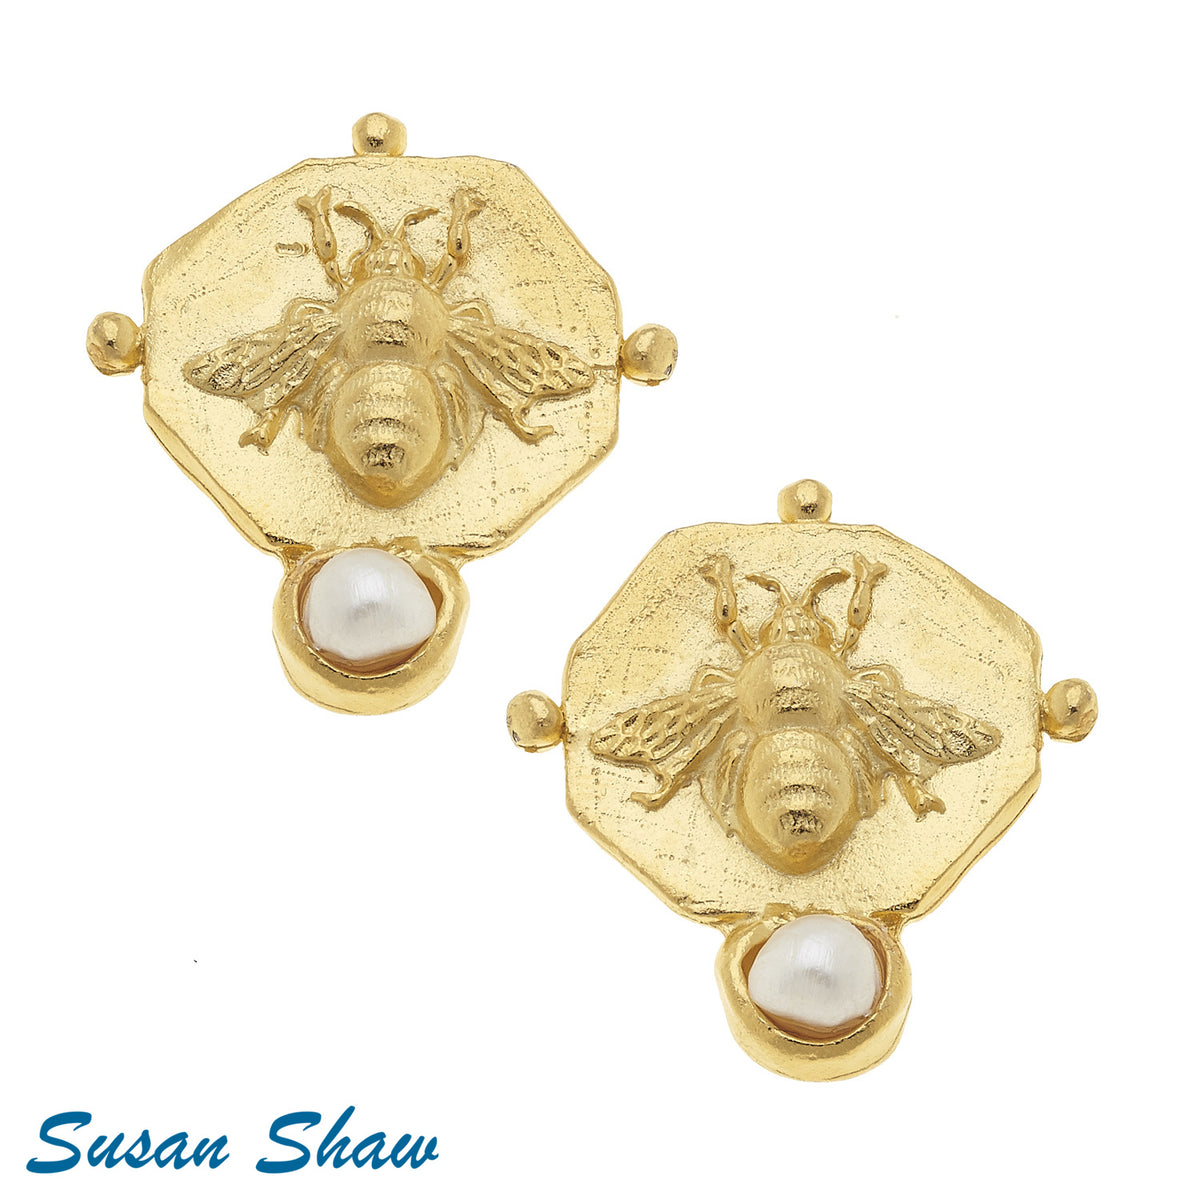 Susan Shaw: Iconic Bee Earrings with Pearls